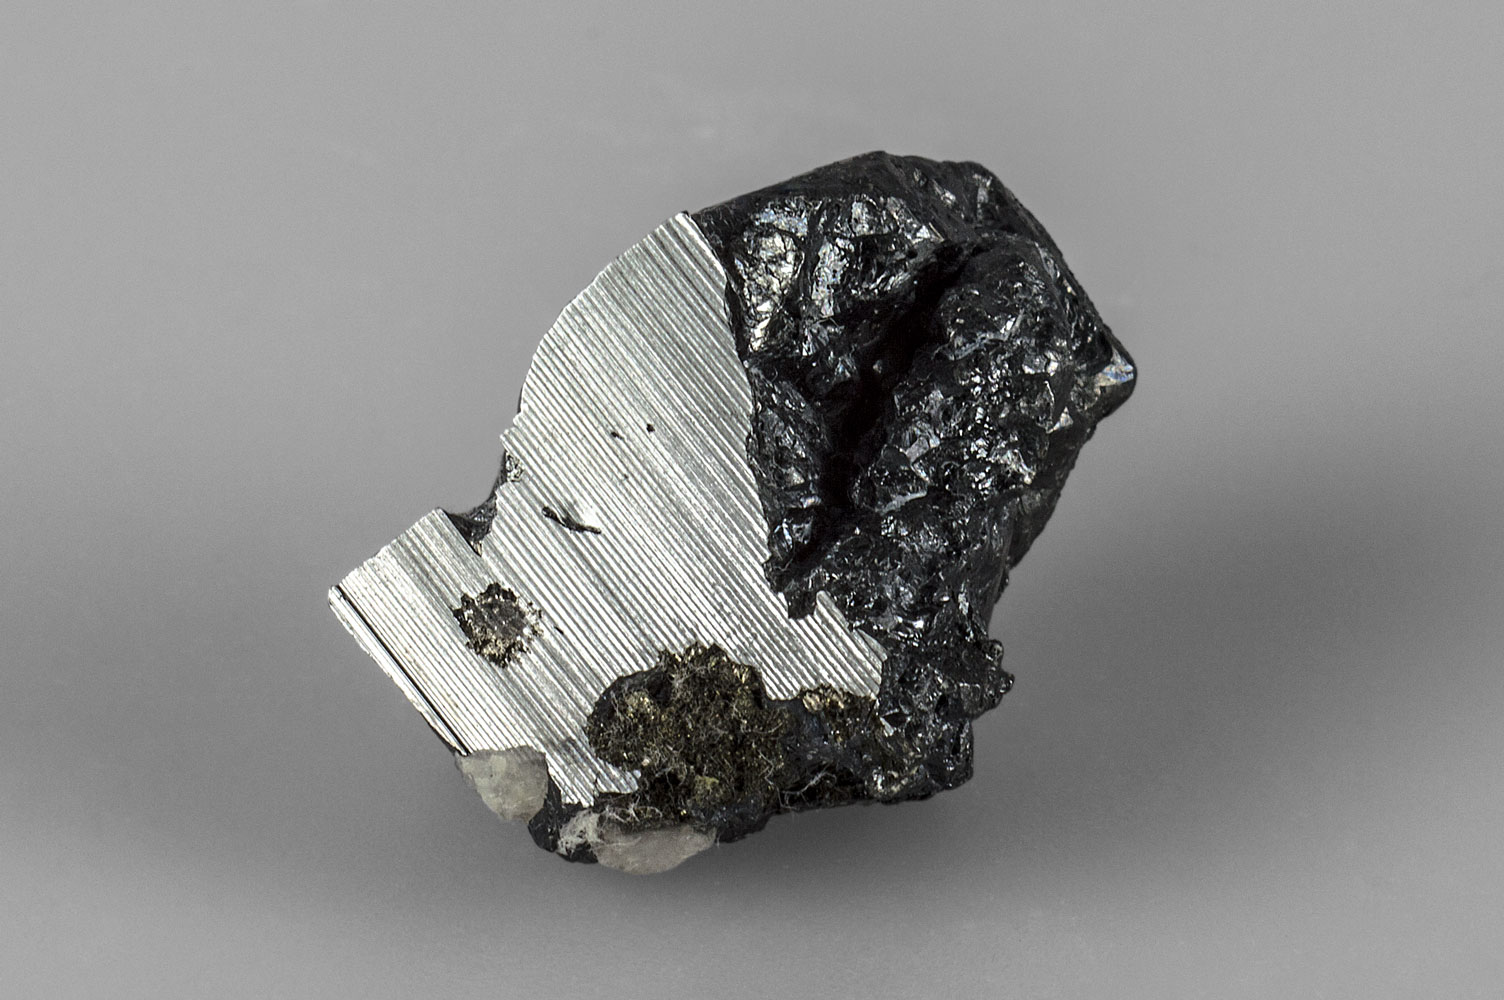 Silver Sulfide monoclinic type - Ag2S